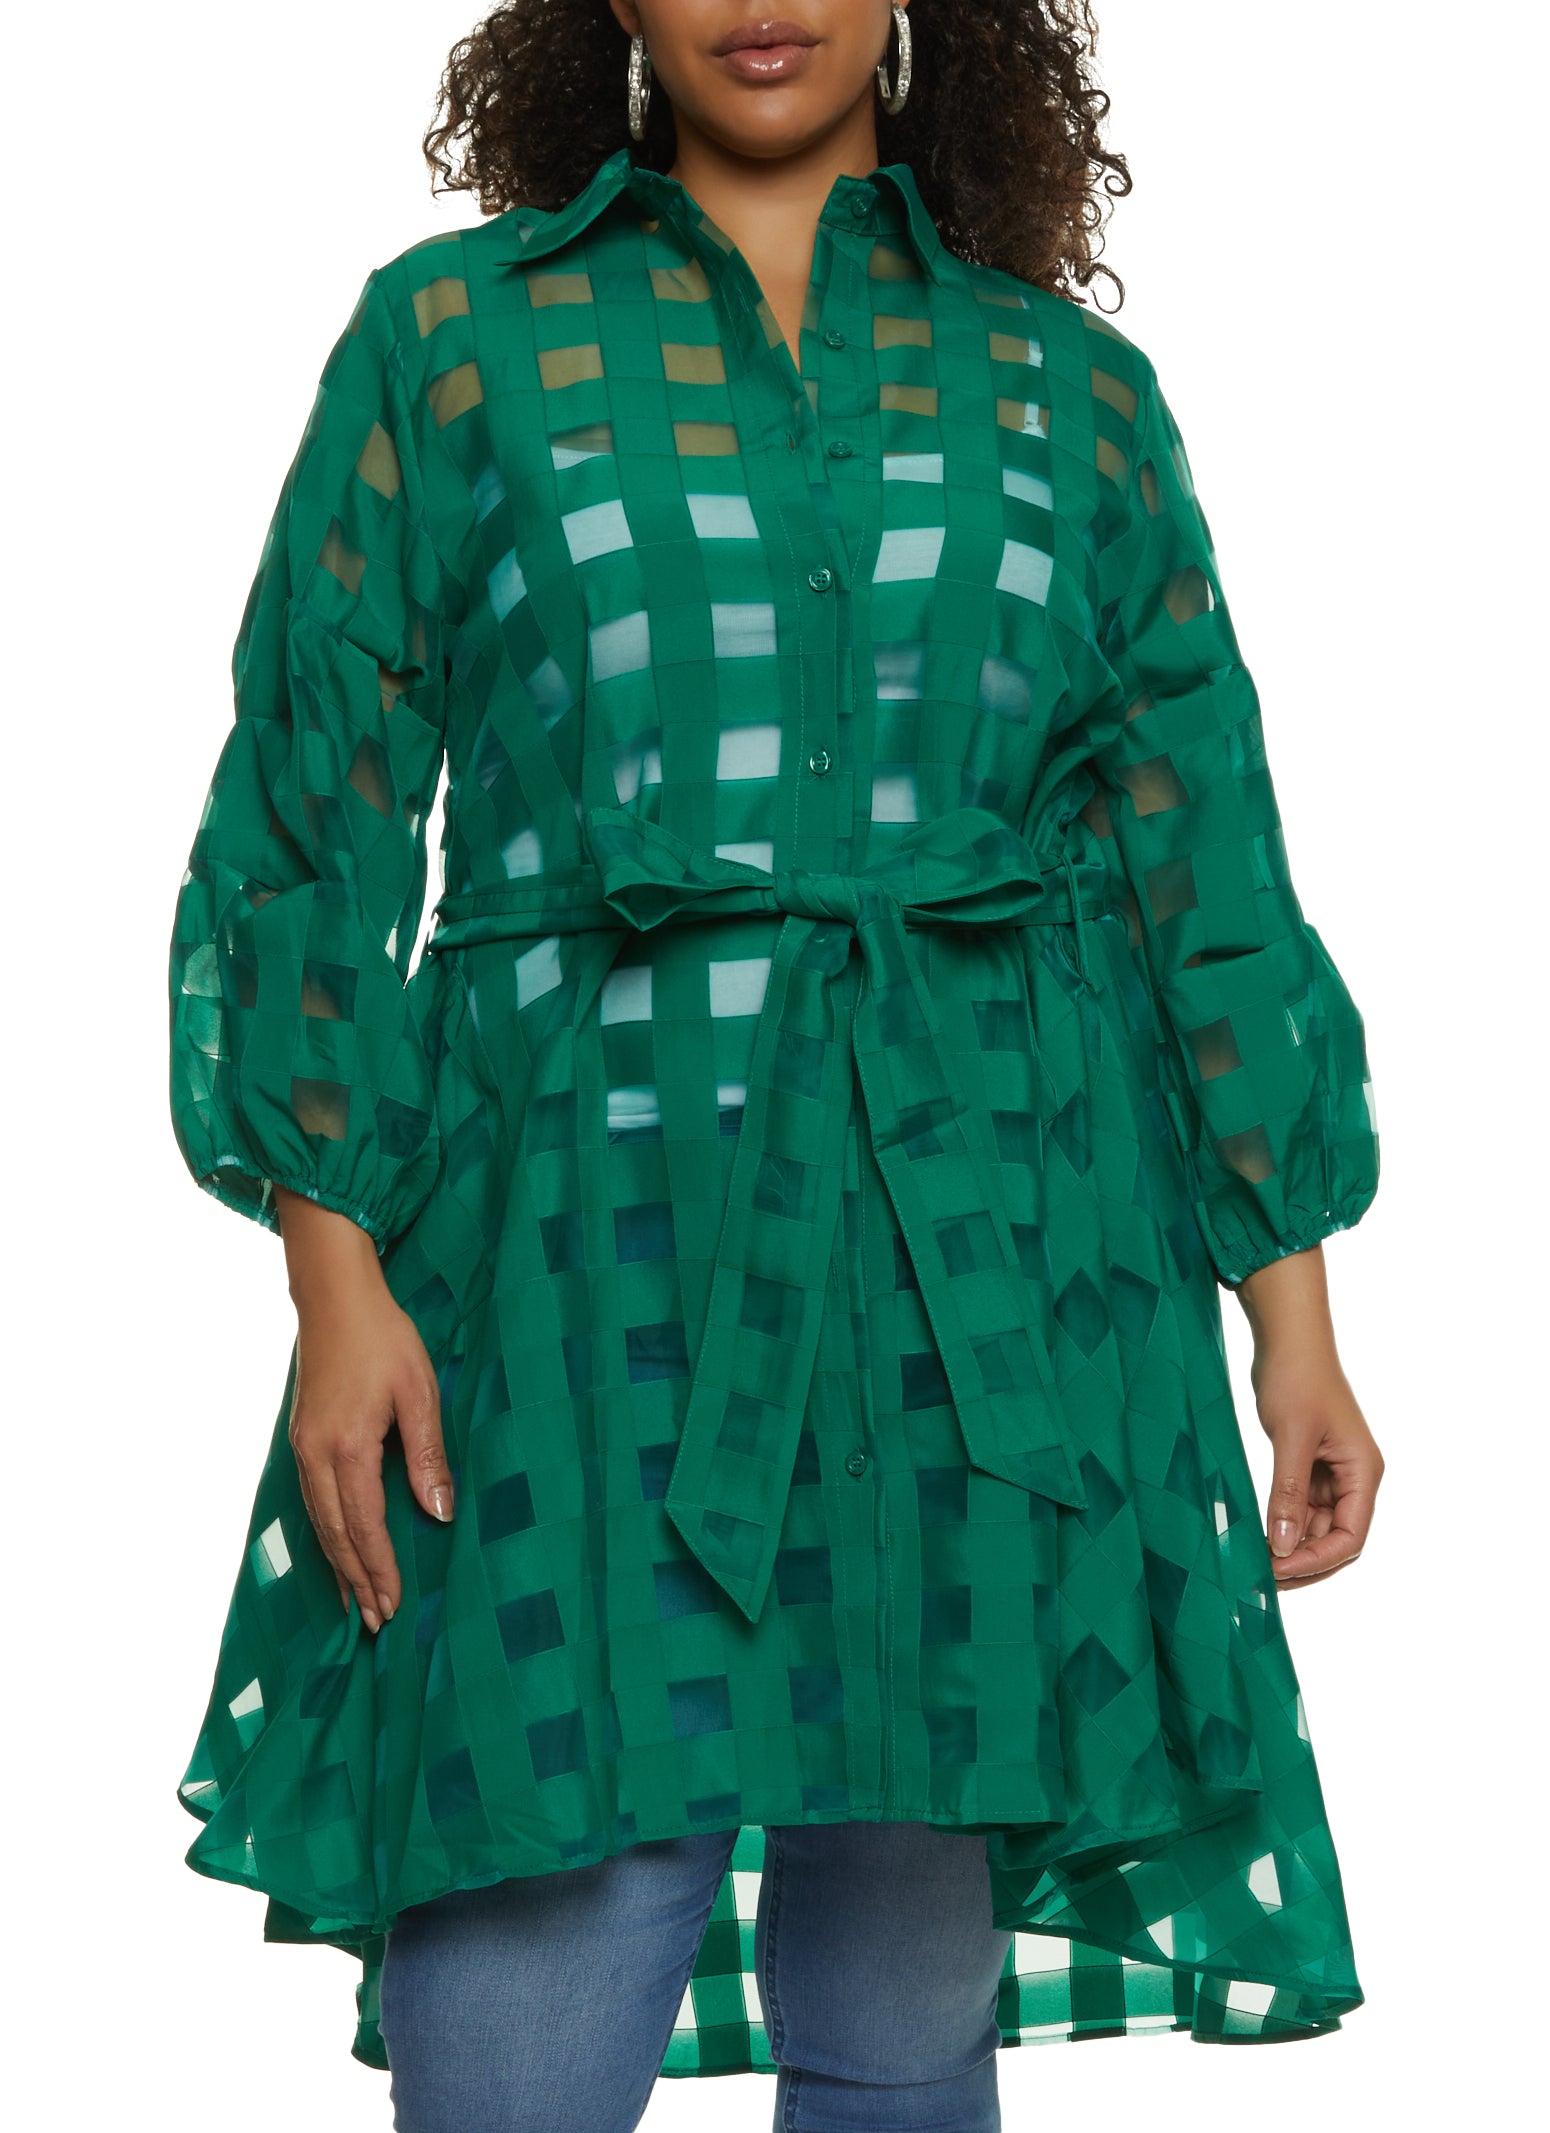 Plus Size Shirt Dresses, Everyday Low Prices